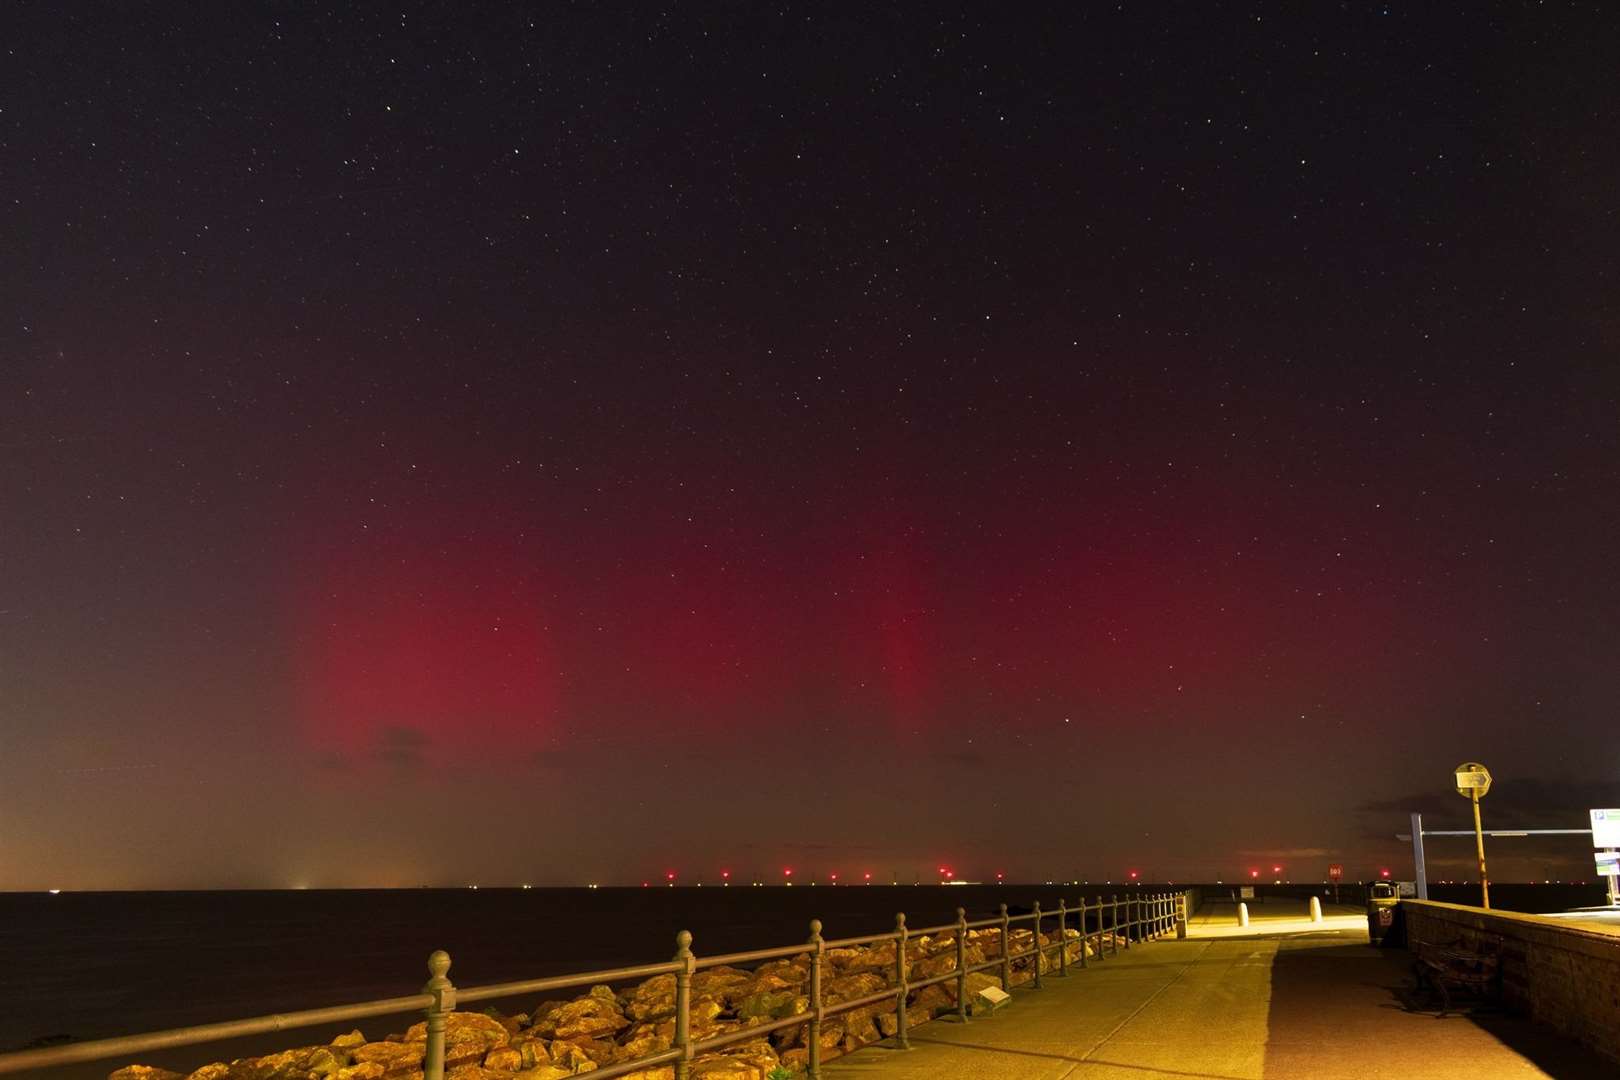 The Northern Lights, also known as the Aurora Borealis, were seen last night in Herne Bay. Picture: Jamie Lally